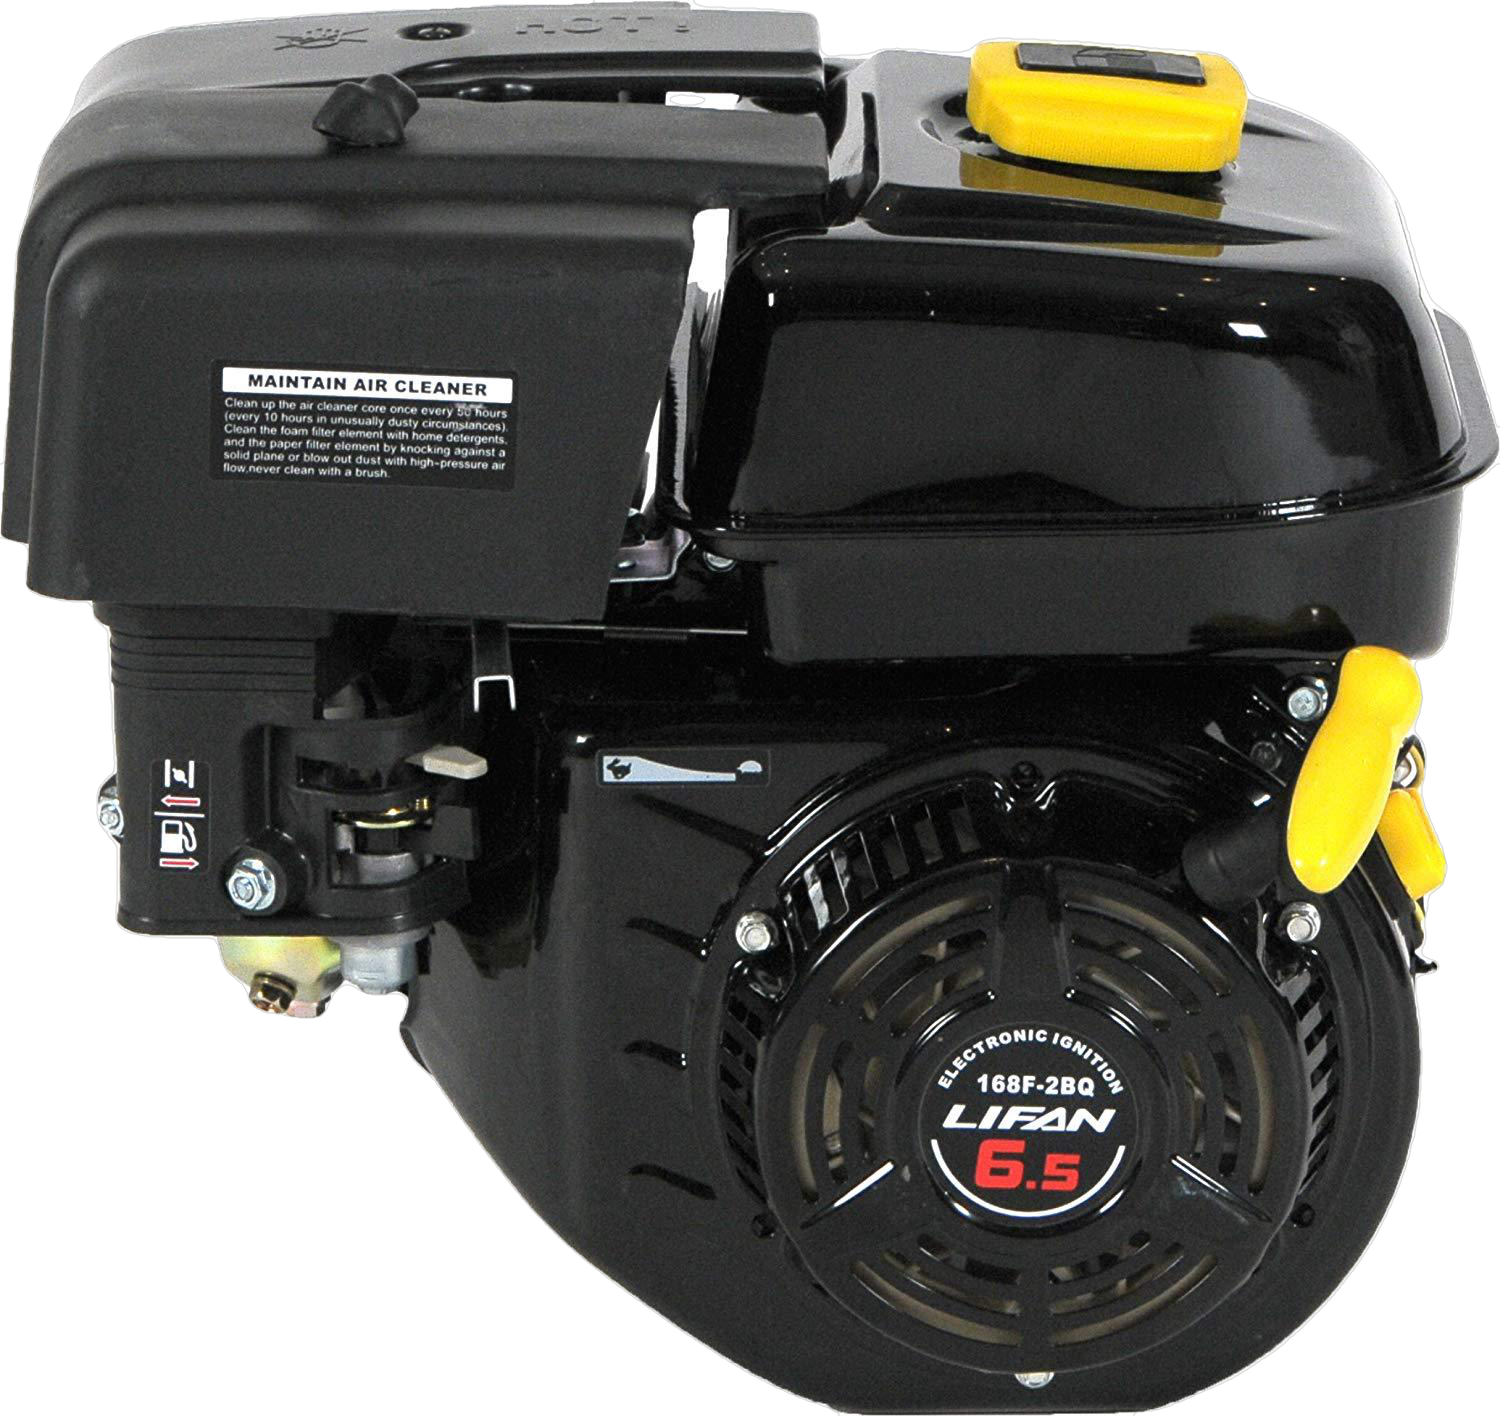 Lifan, Lifan LF168F-2BDQ 6.5 HP 196cc 4-Stroke OHV Gas Engine with Electric Start, 3 Amp Open Box (Never Used)